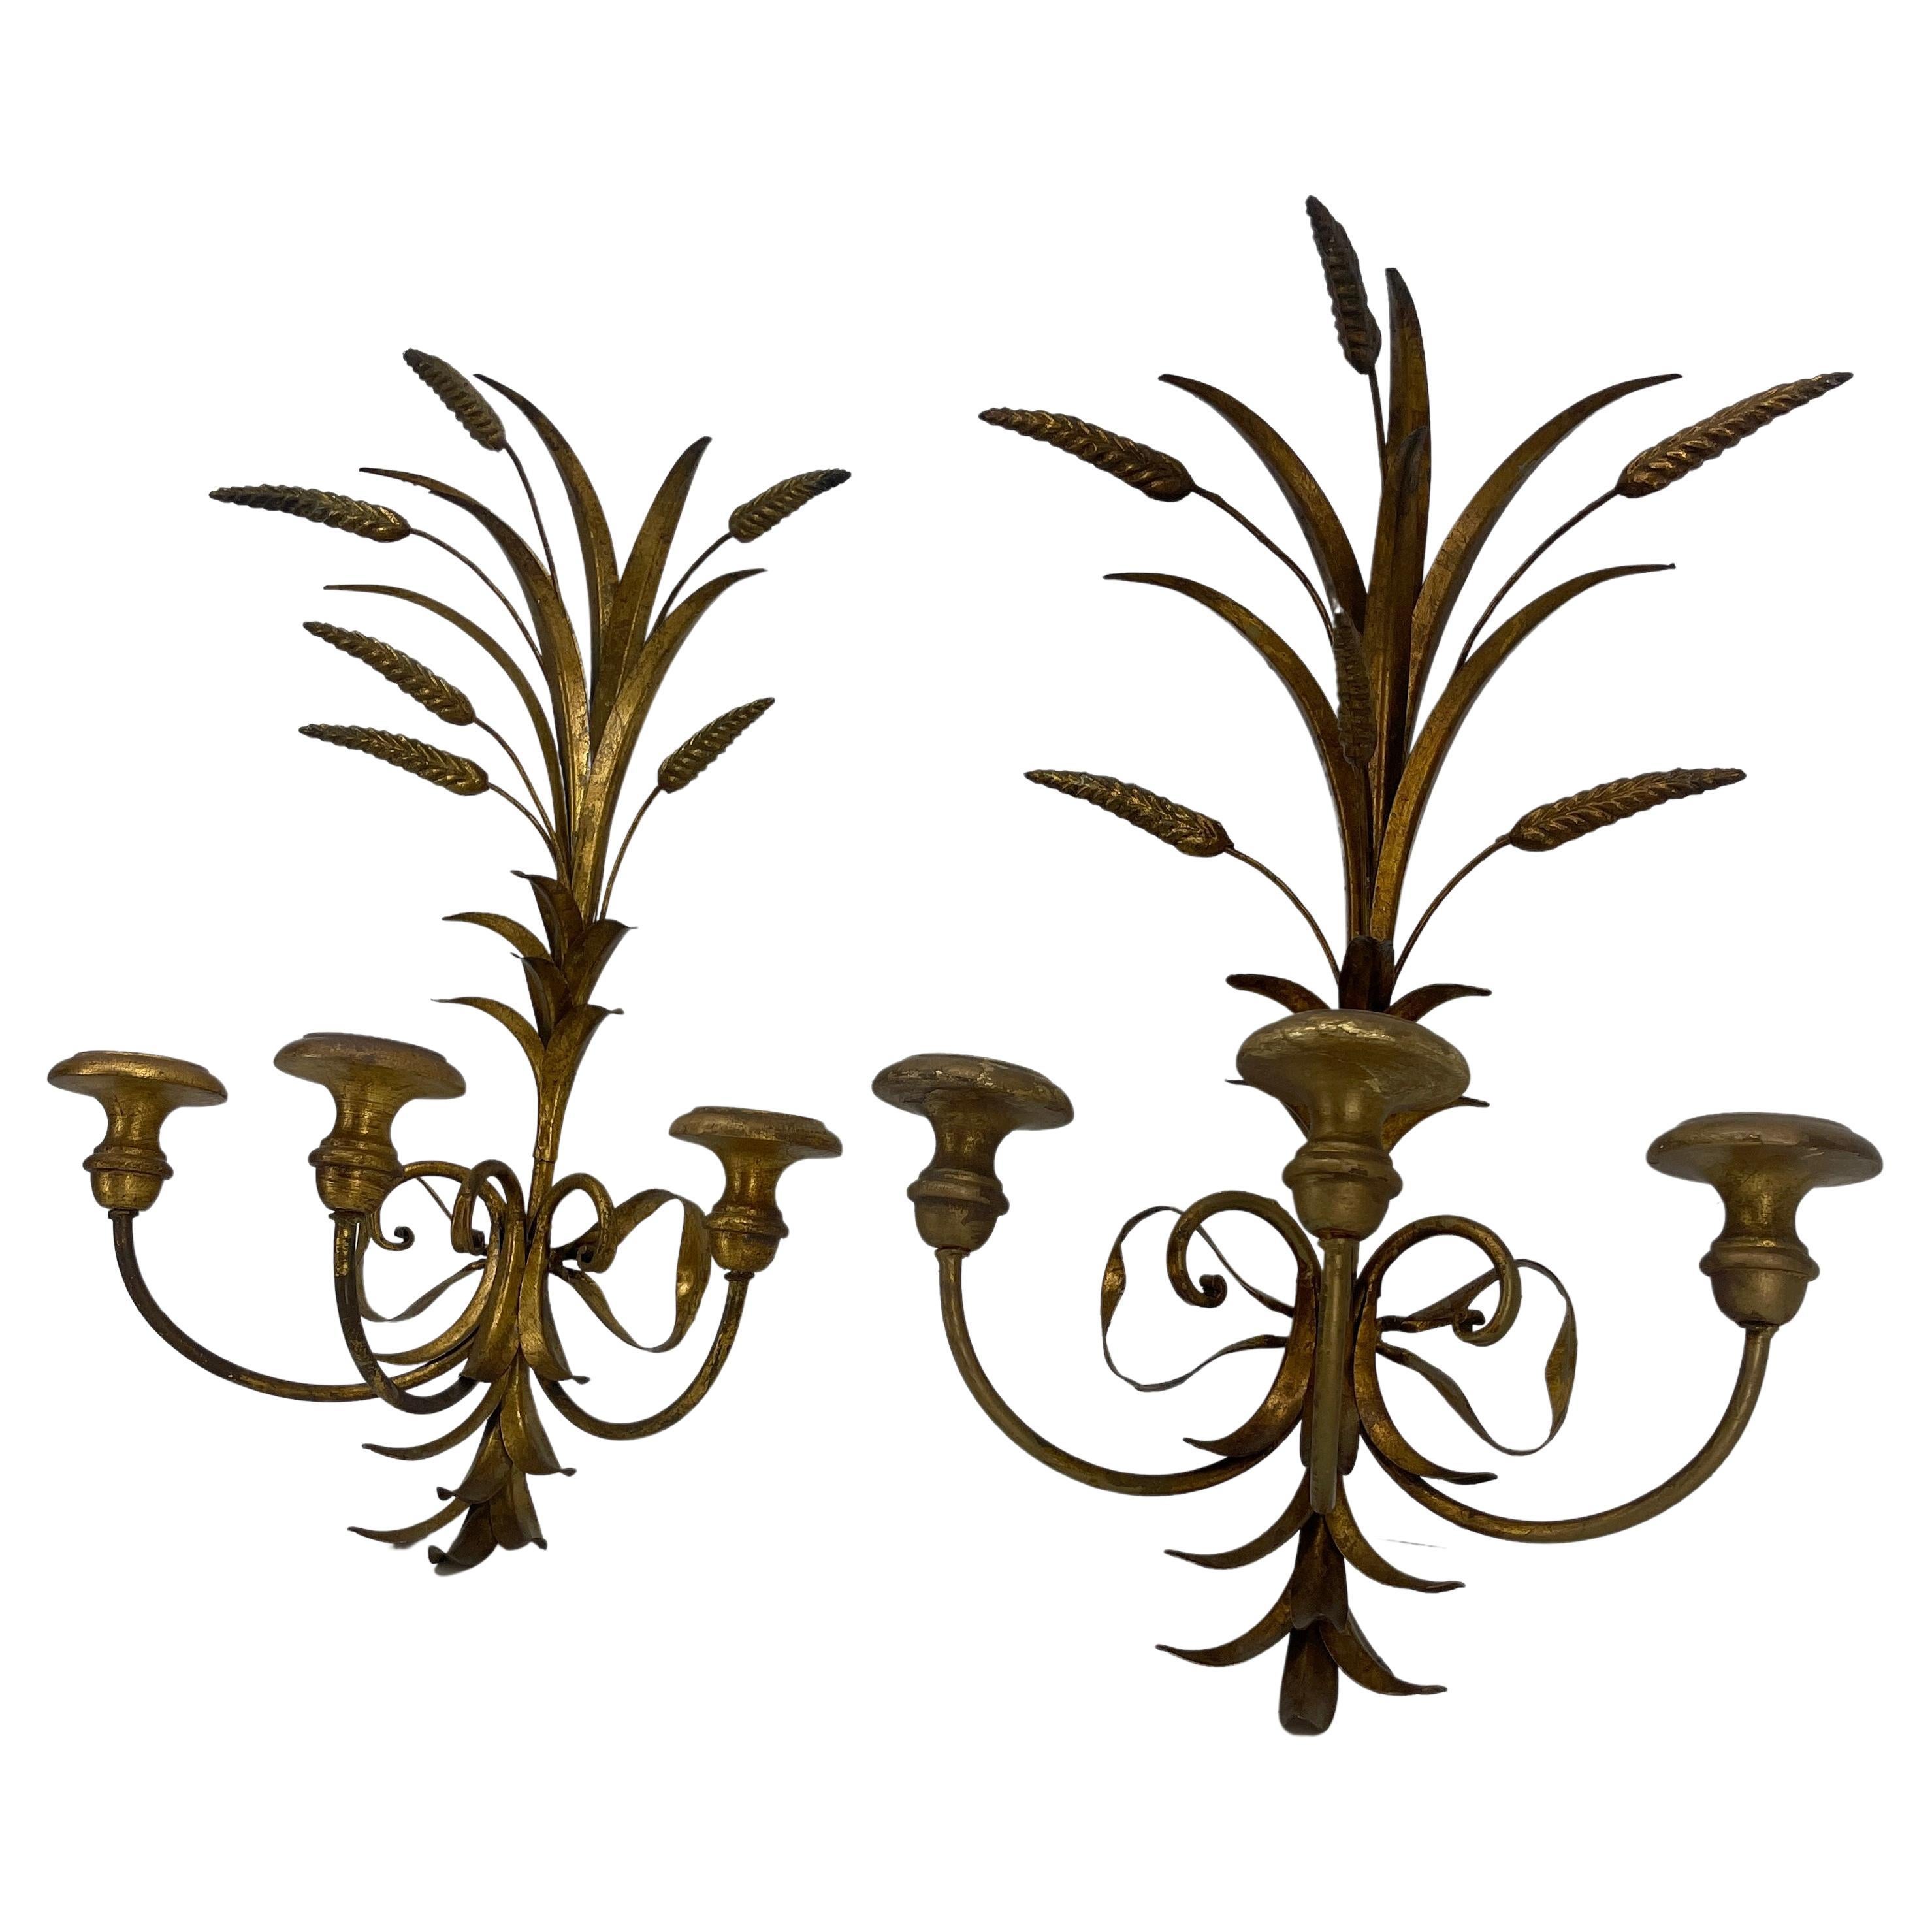 Hollywood Regency gilt wheat sheaf pair of candle sconces in the manner of Salvadori.
This glamorous pair of wall candle sconces is an iconic style to the period of beauty and elegance. The sconces will be perfect gracing a dining room, hallway,